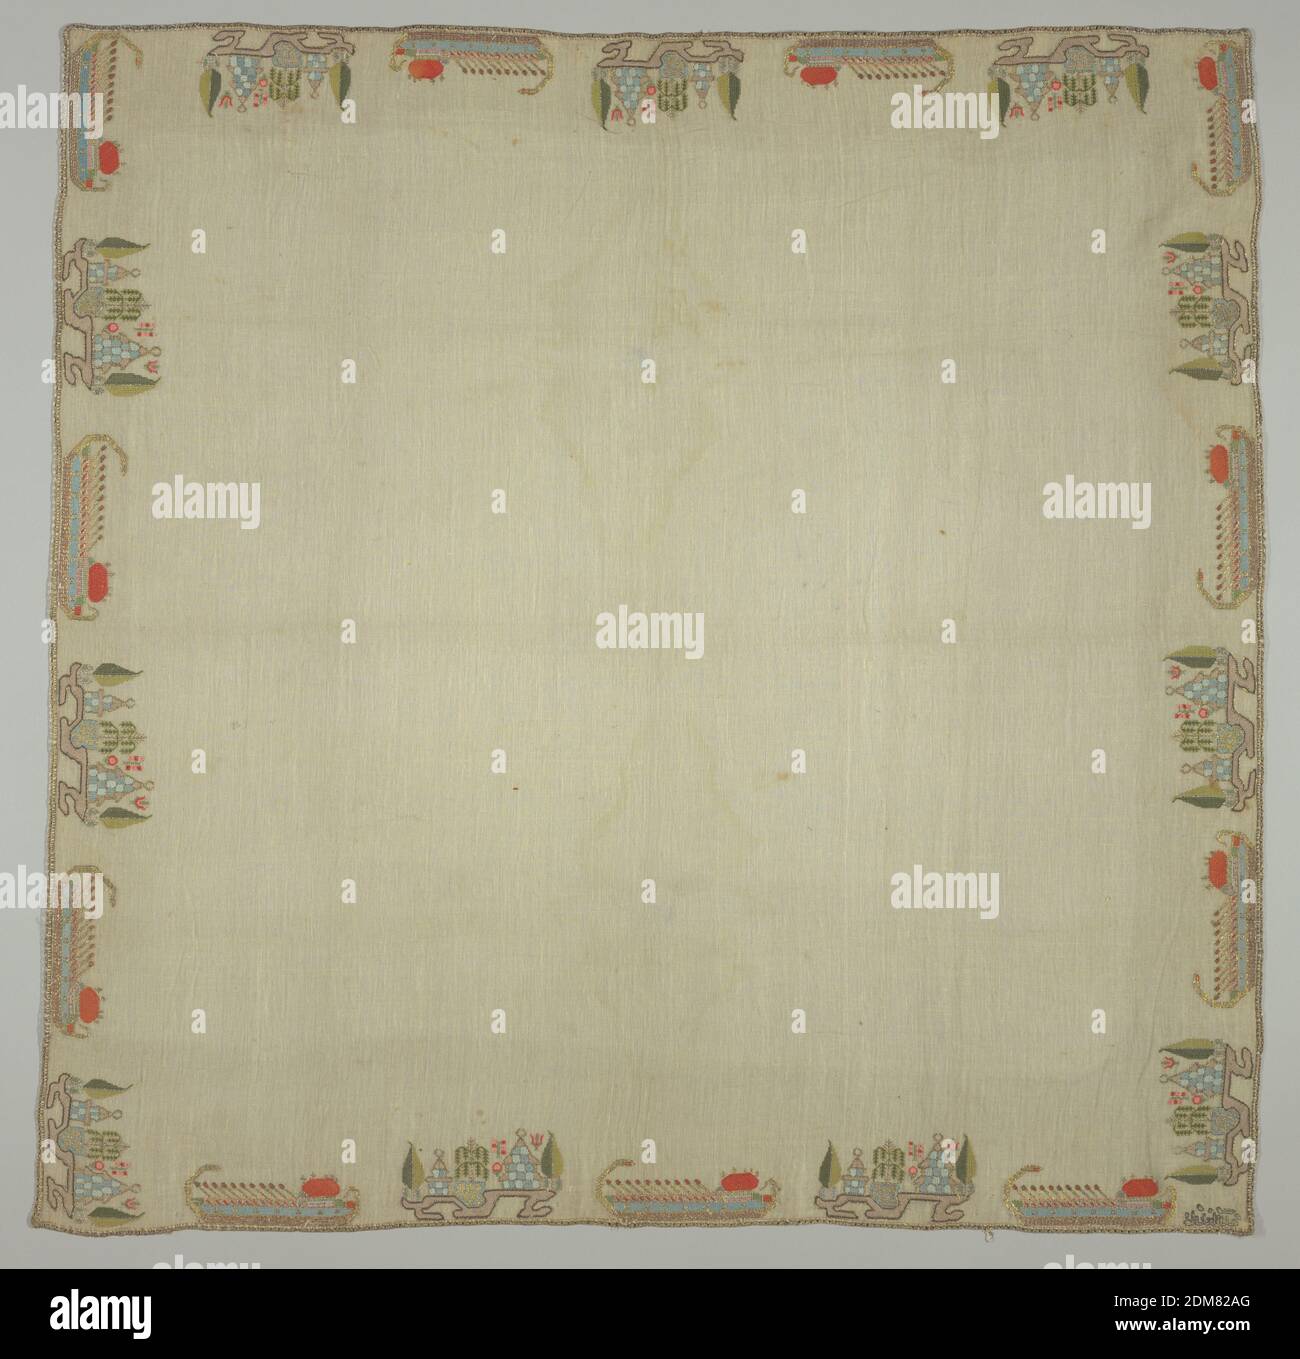 Square, Medium: cotton, silk and metal Technique: embroidered, Square of sheer cream-colored cotton, embroidered on all four sides with colored silks and metal thread. Design of detached motifs: an island with trees; and a galley with oars raised in a single line., Near East, late 19th century, embroidery & stitching, Square Stock Photo